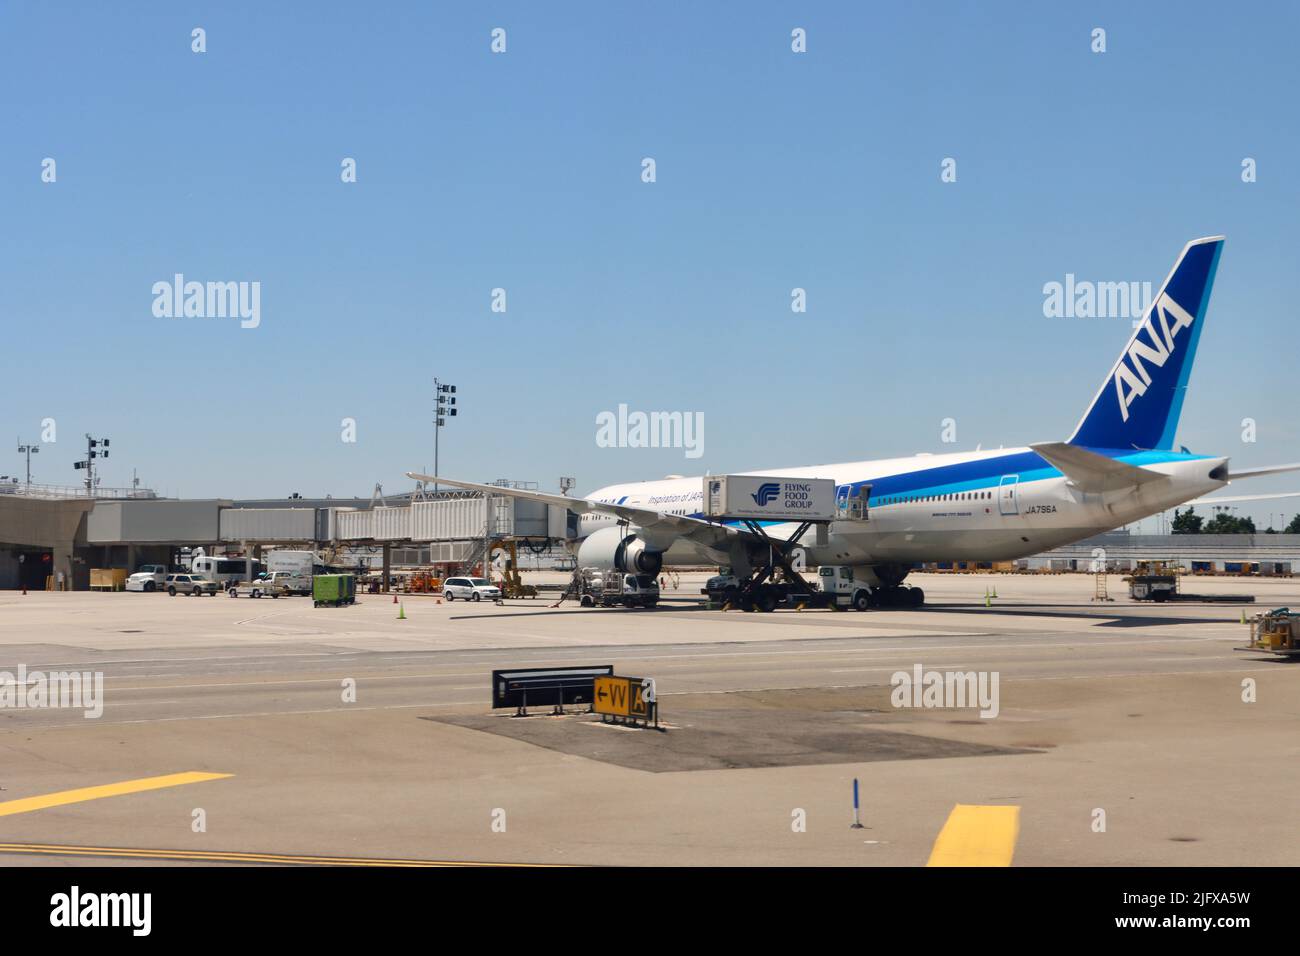 ANA plane parked at JFK airport on June 6th 2022 Stock Photo